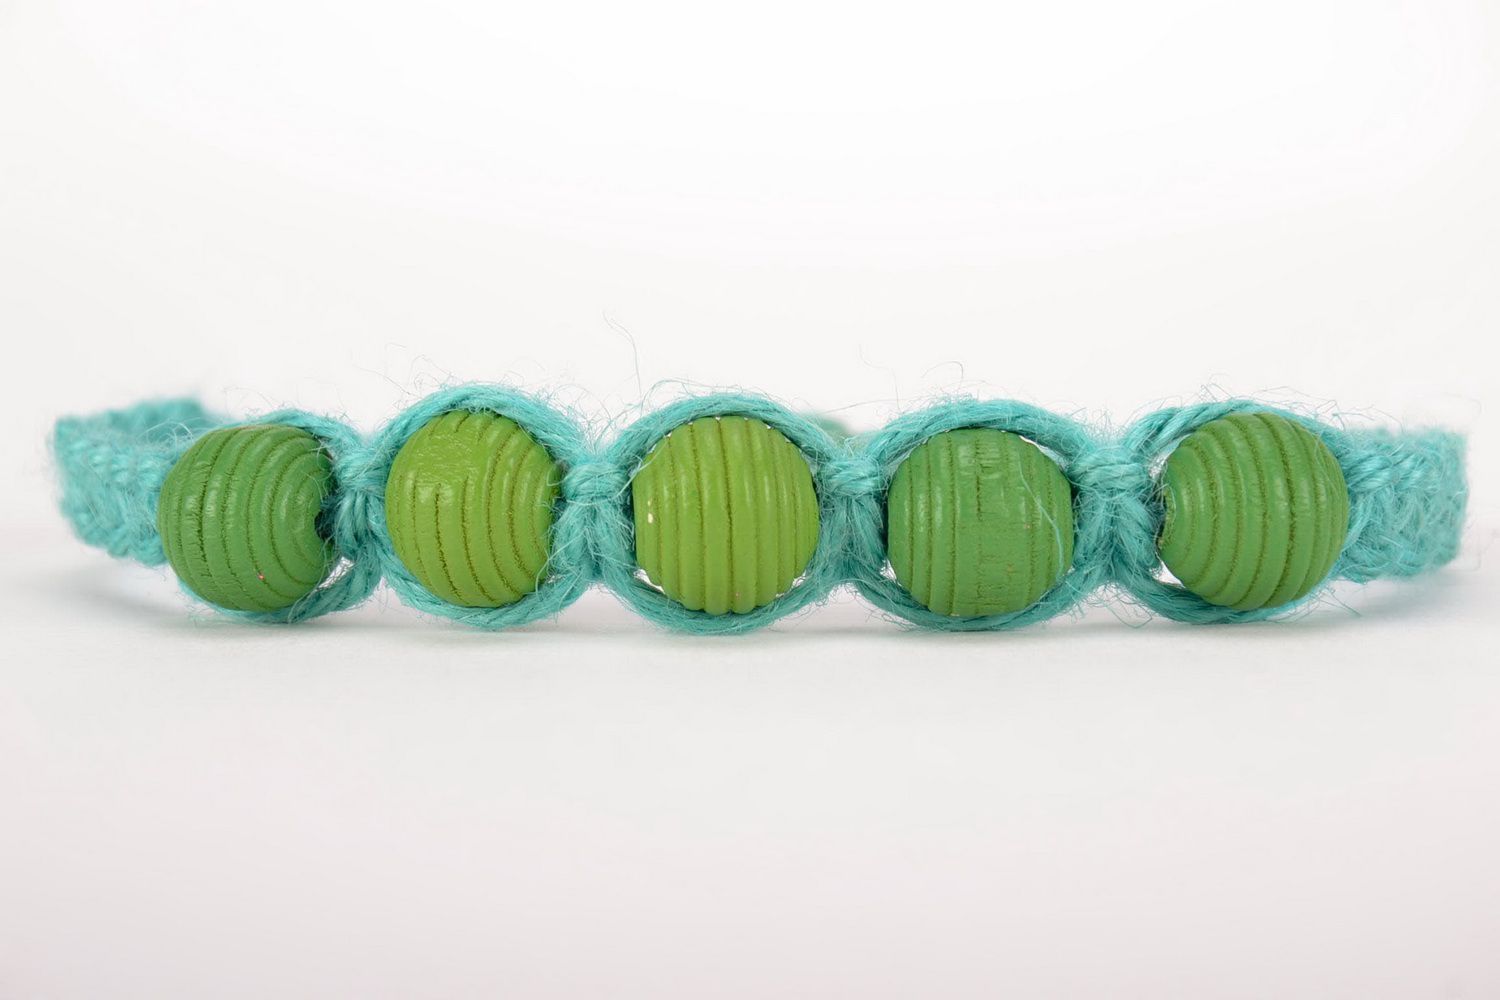 Bracelet made of satin and wood photo 3